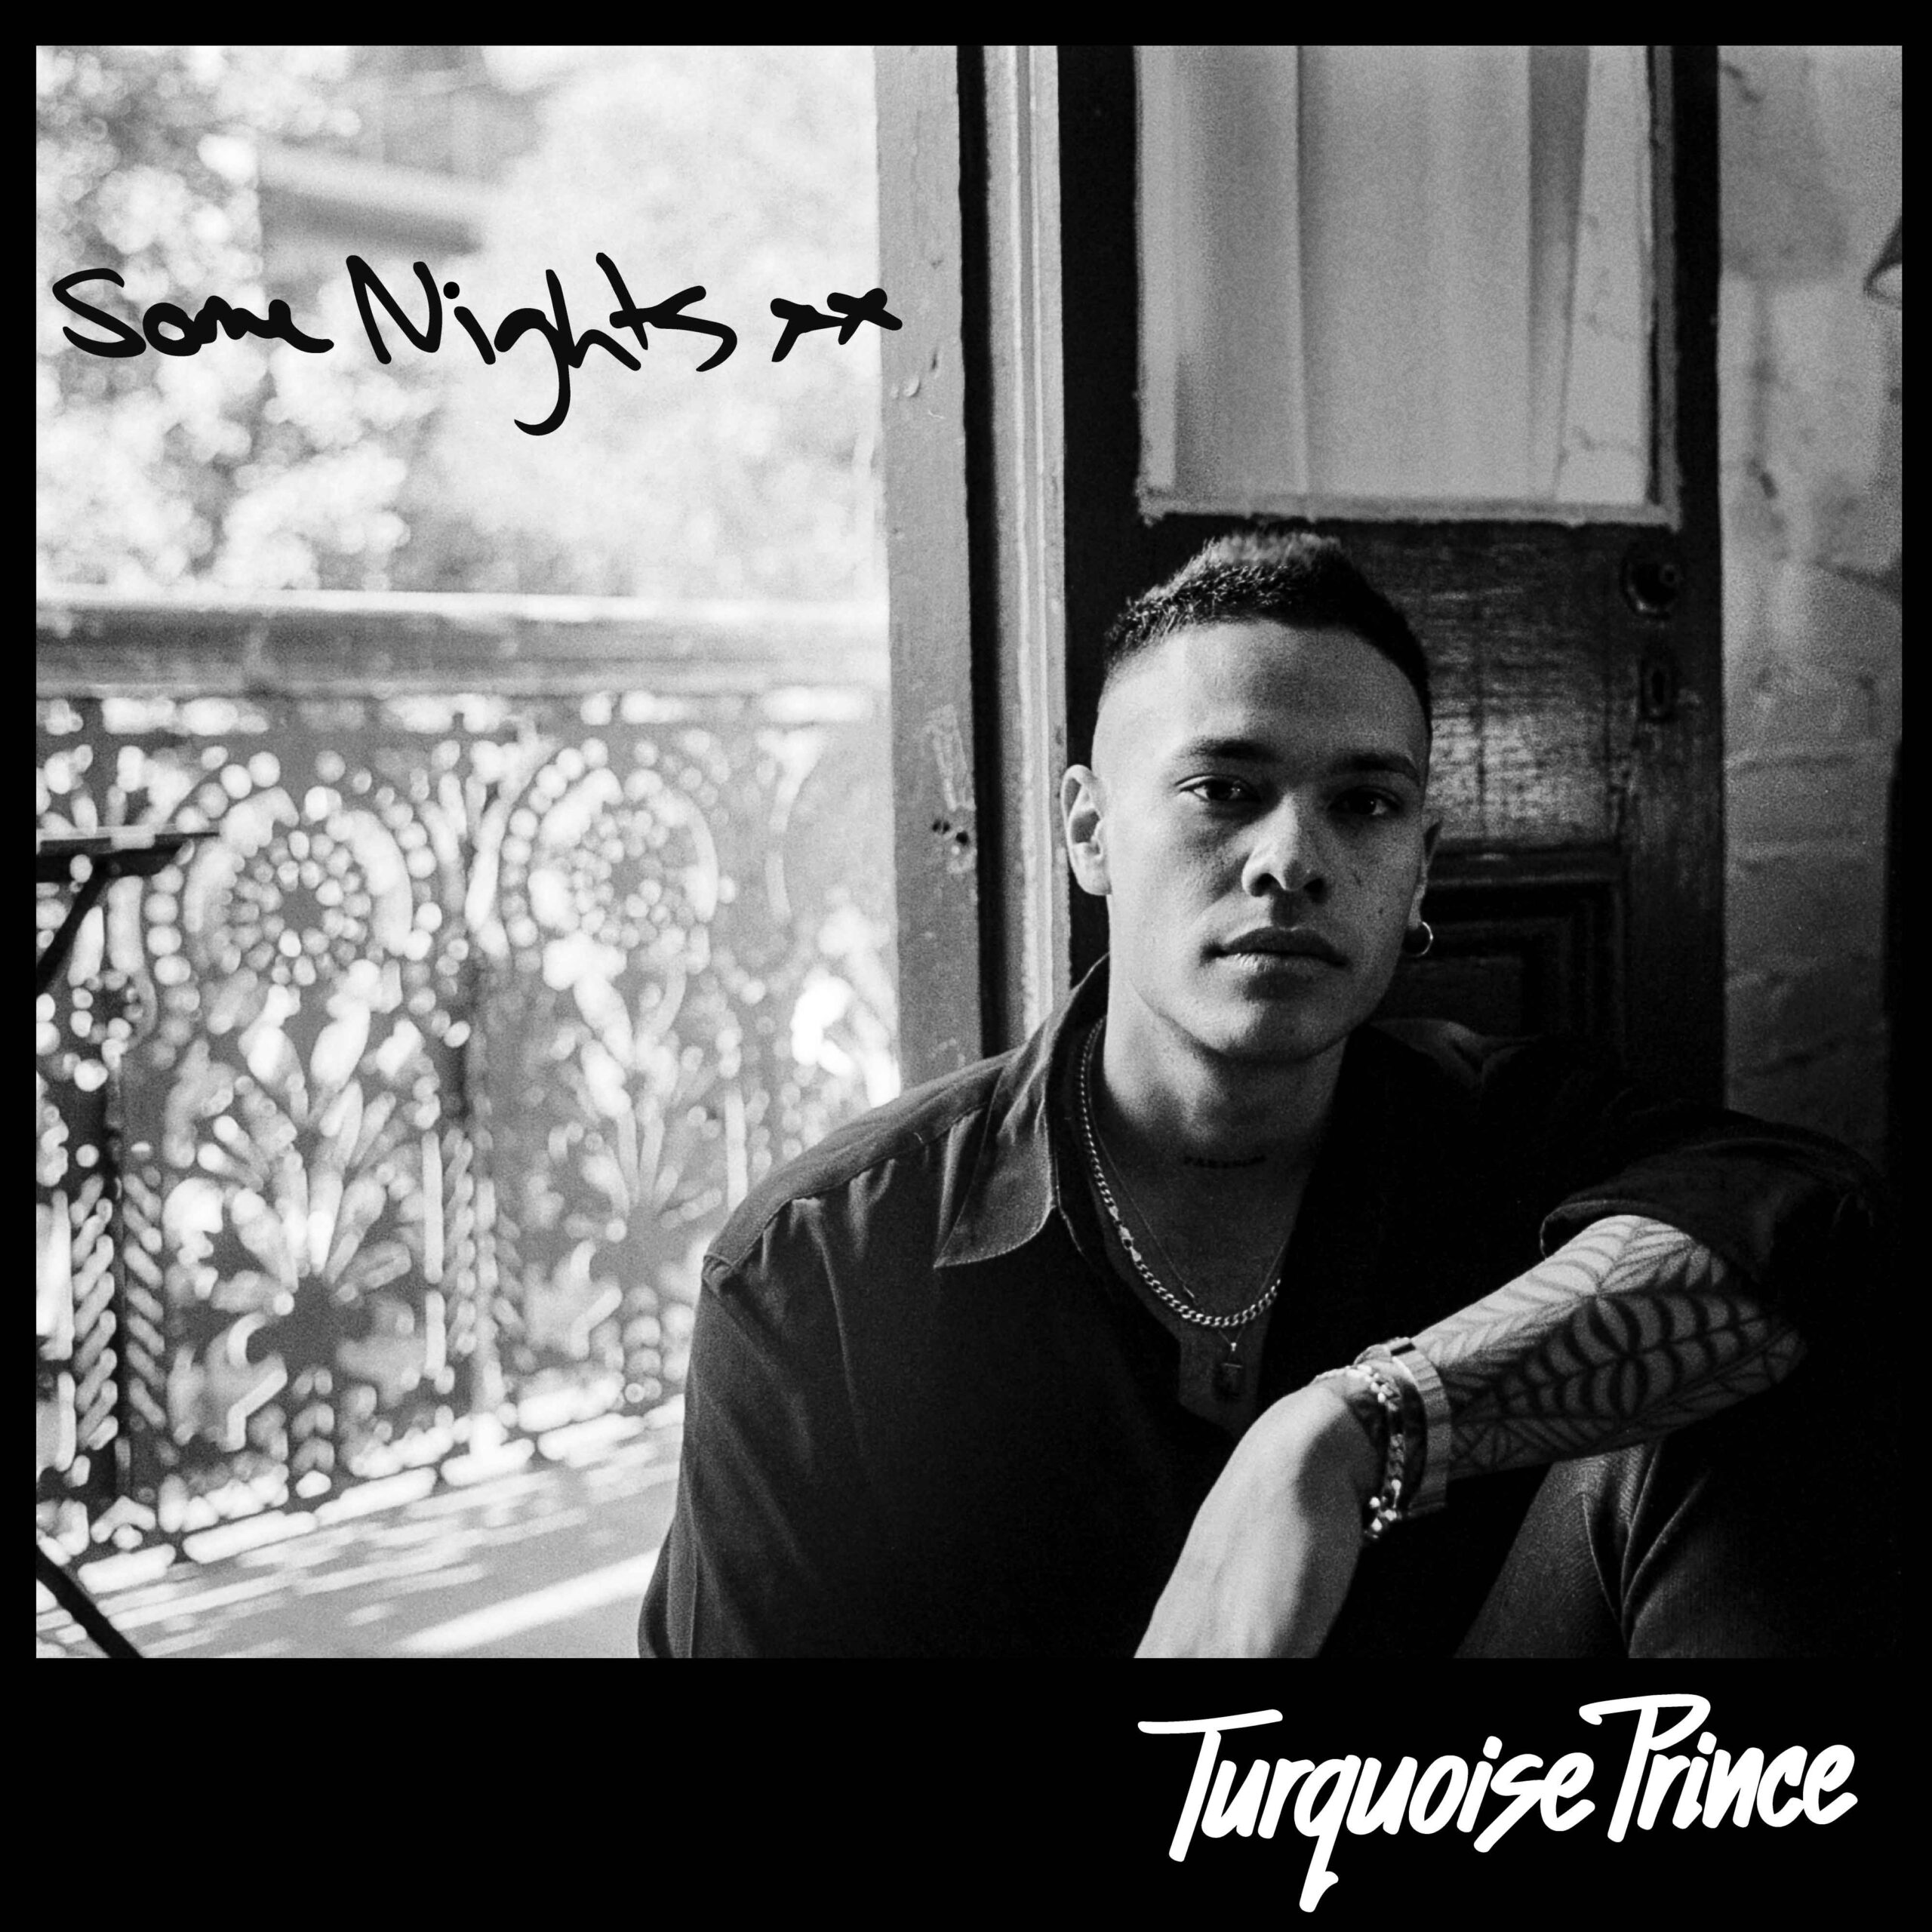 TURQUOISE PRINCE RELEASES BRAND NEW SINGLE ‘SOME NIGHTS’